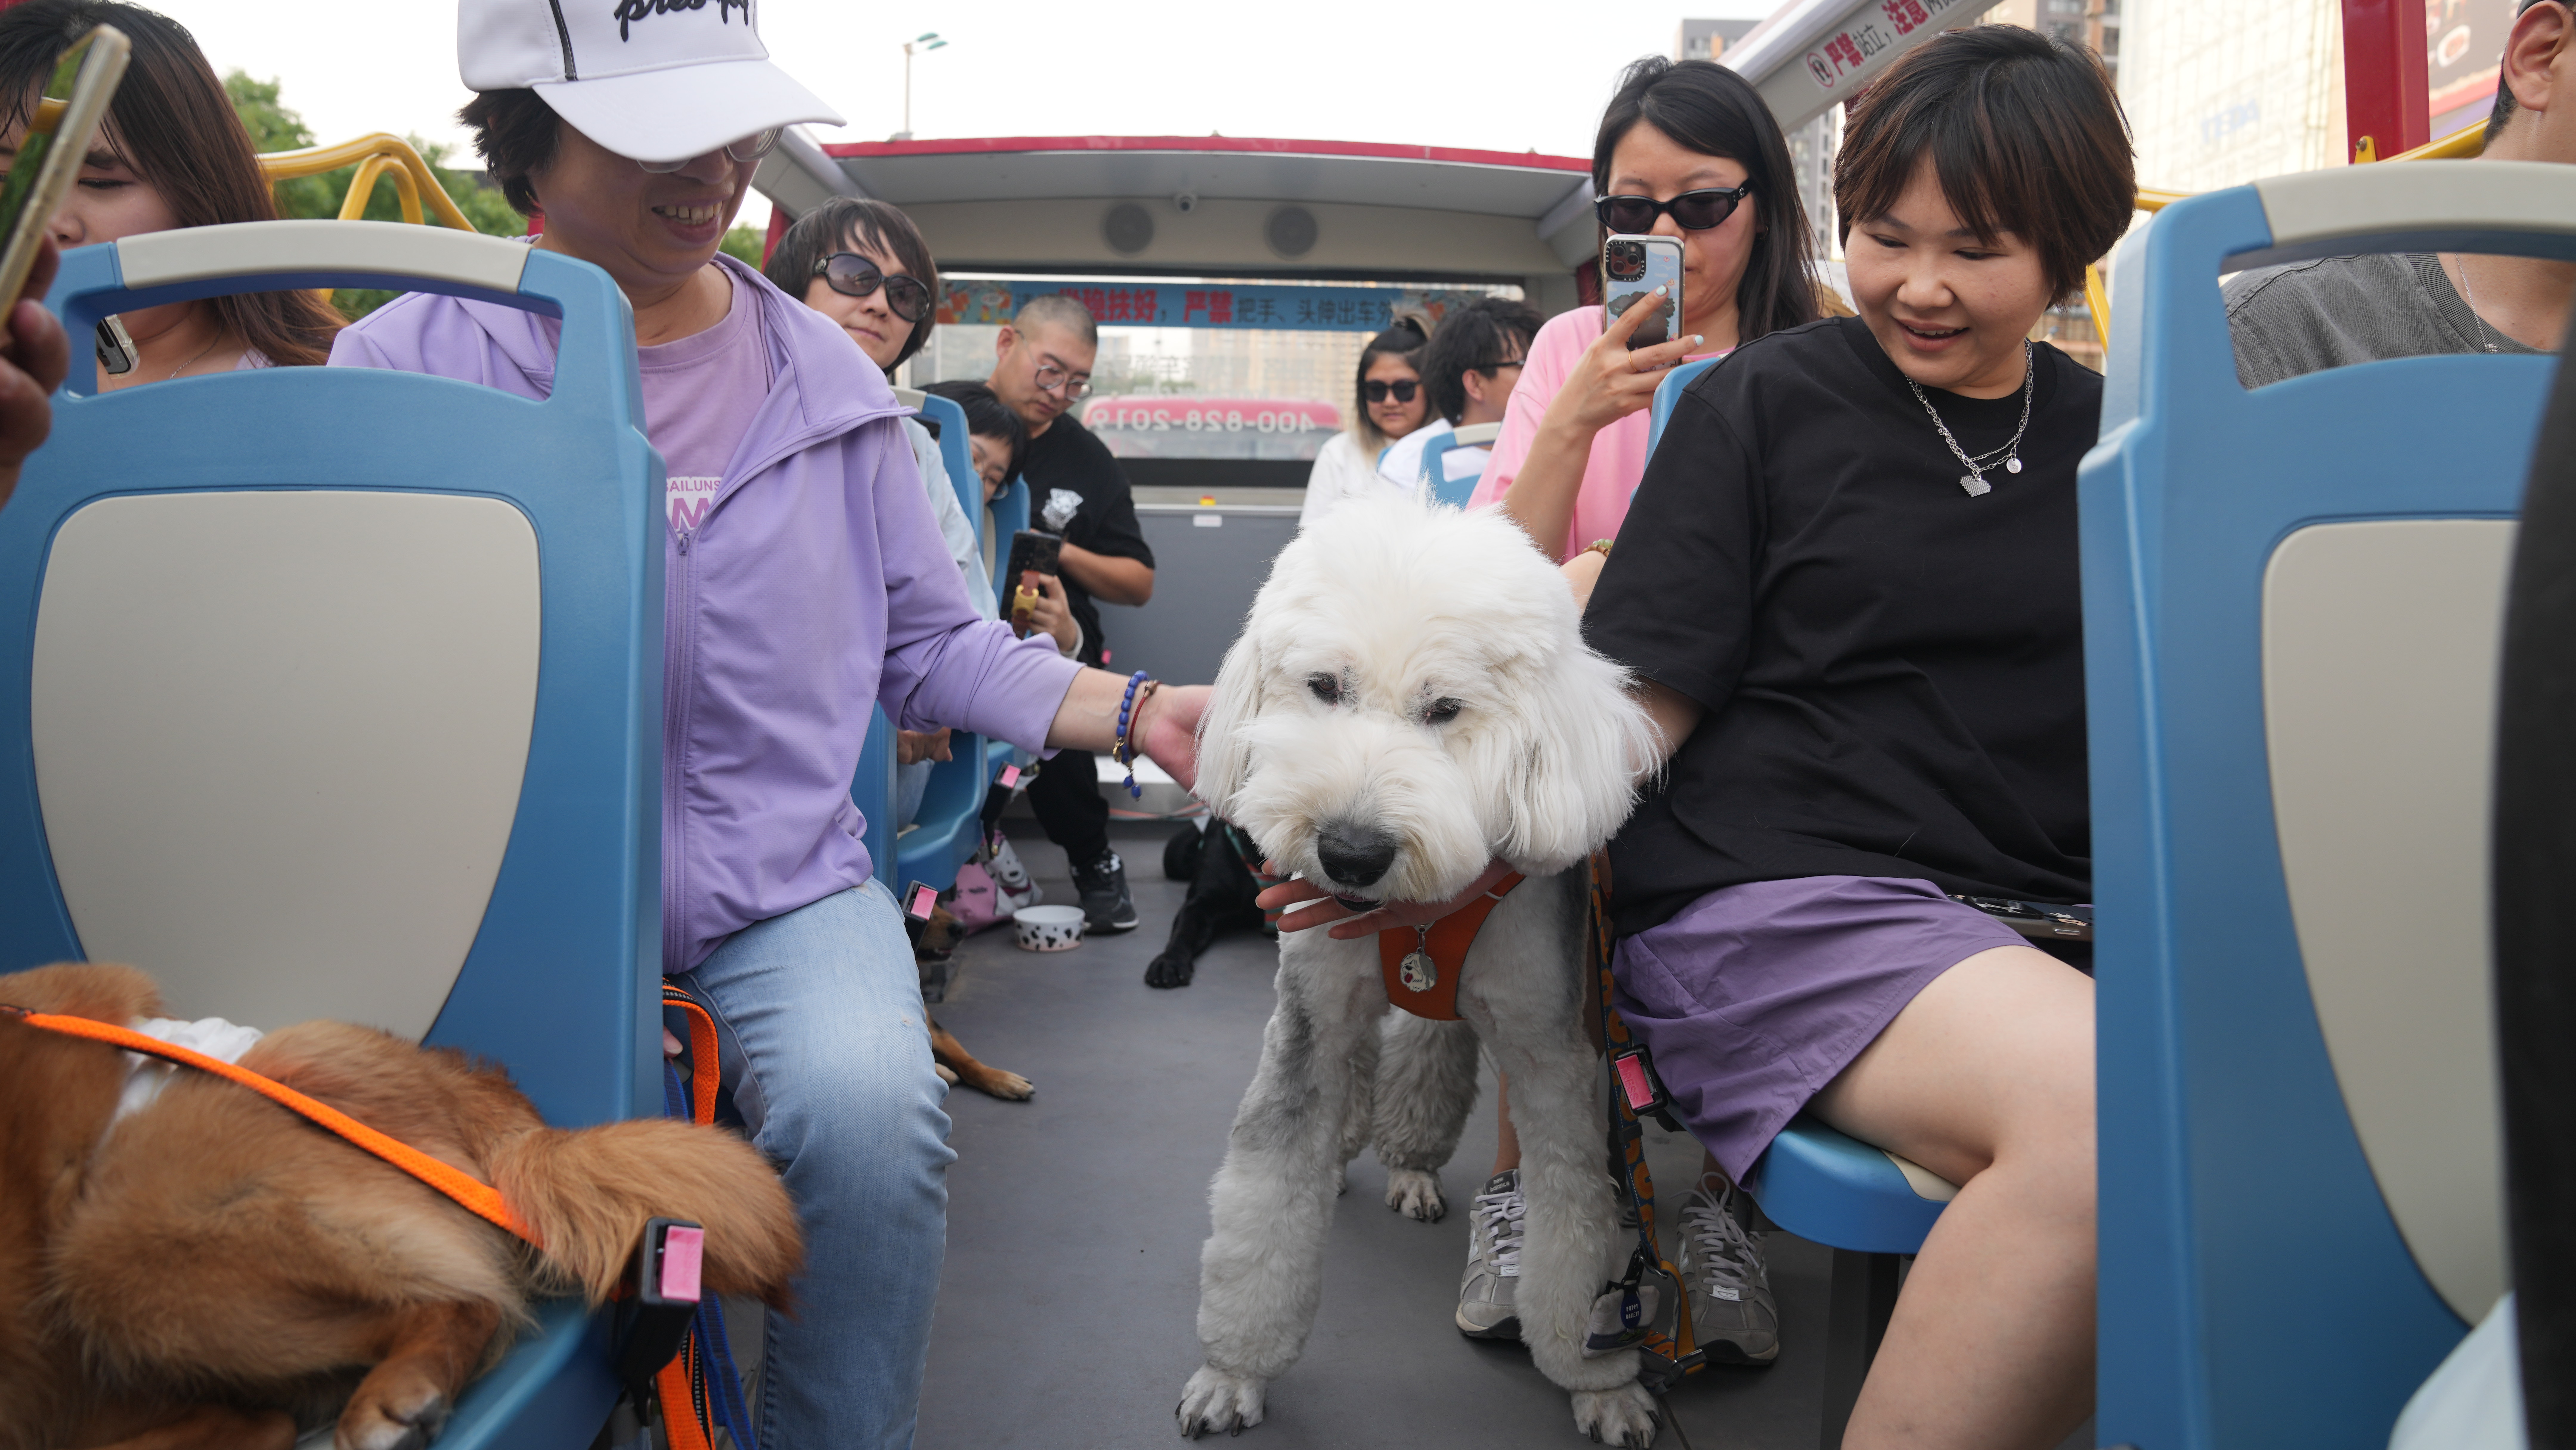 Tour groups organized by pet enthusiasts see popularity